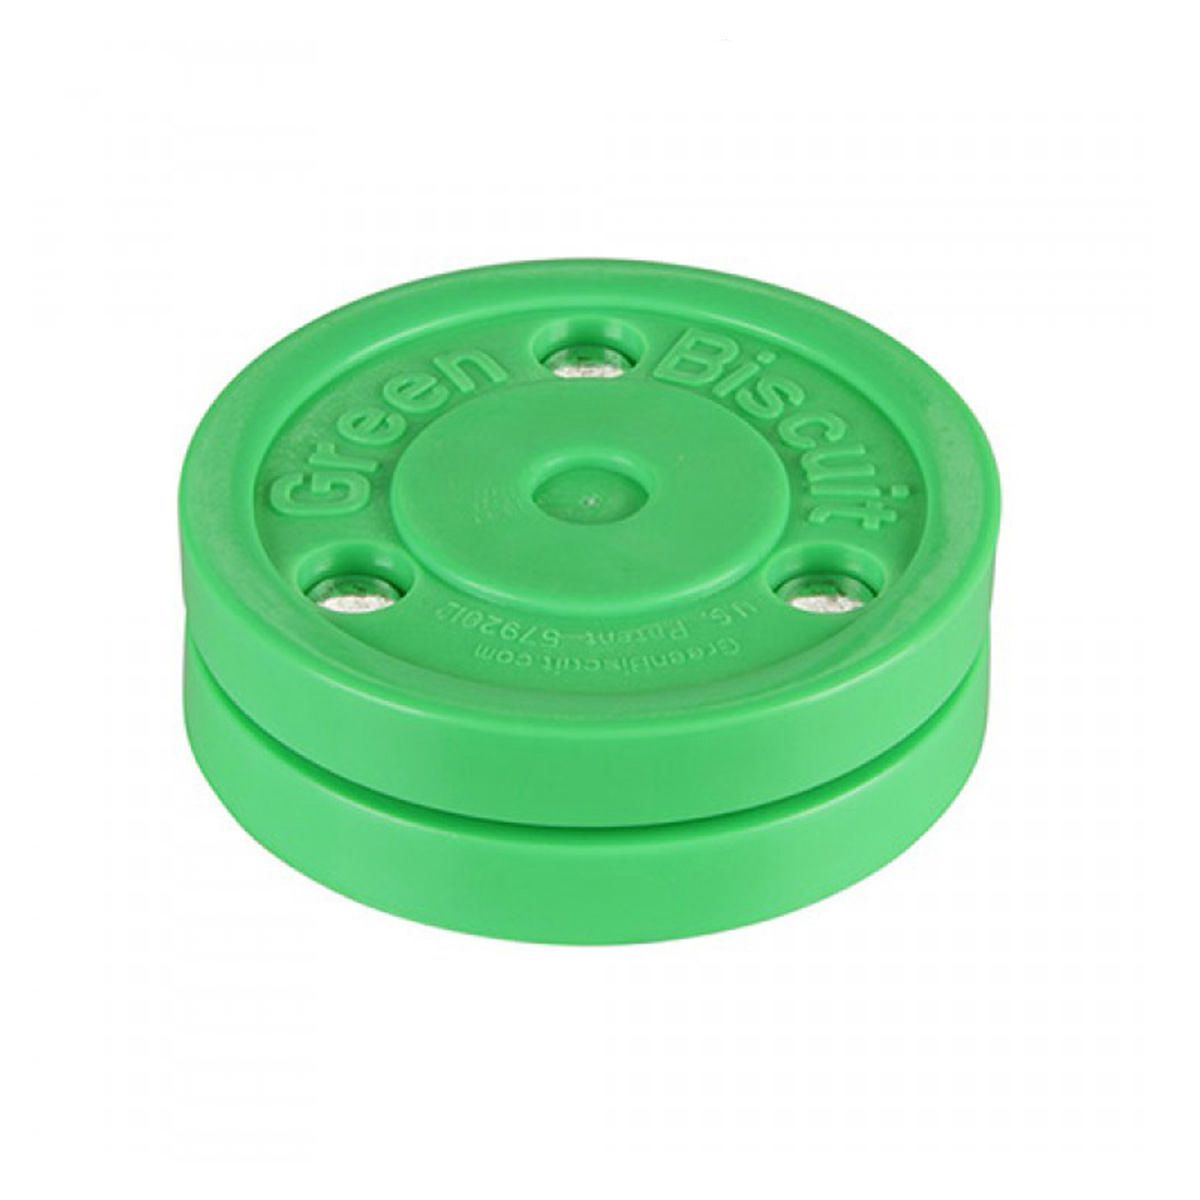 Green Biscuit Training Puck and Tape Bundle for Off Ice Hockey Training and Practice Hockey Wraparound